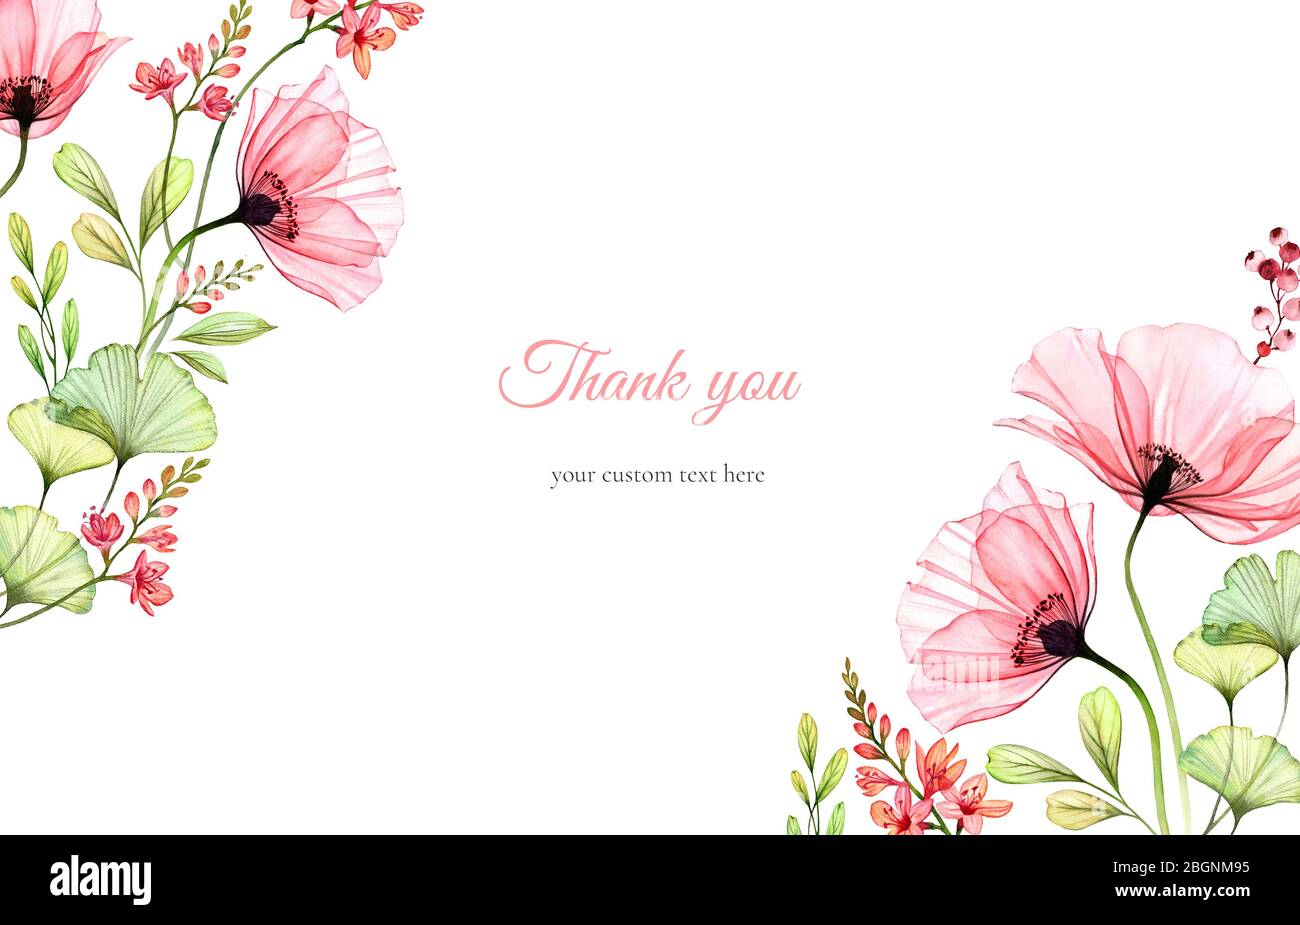 Watercolor floral background. Thank you Card template with text.  Transparent poppy flowers arranged in diagonal. Isolated hand drawn banner  with big Stock Photo - Alamy